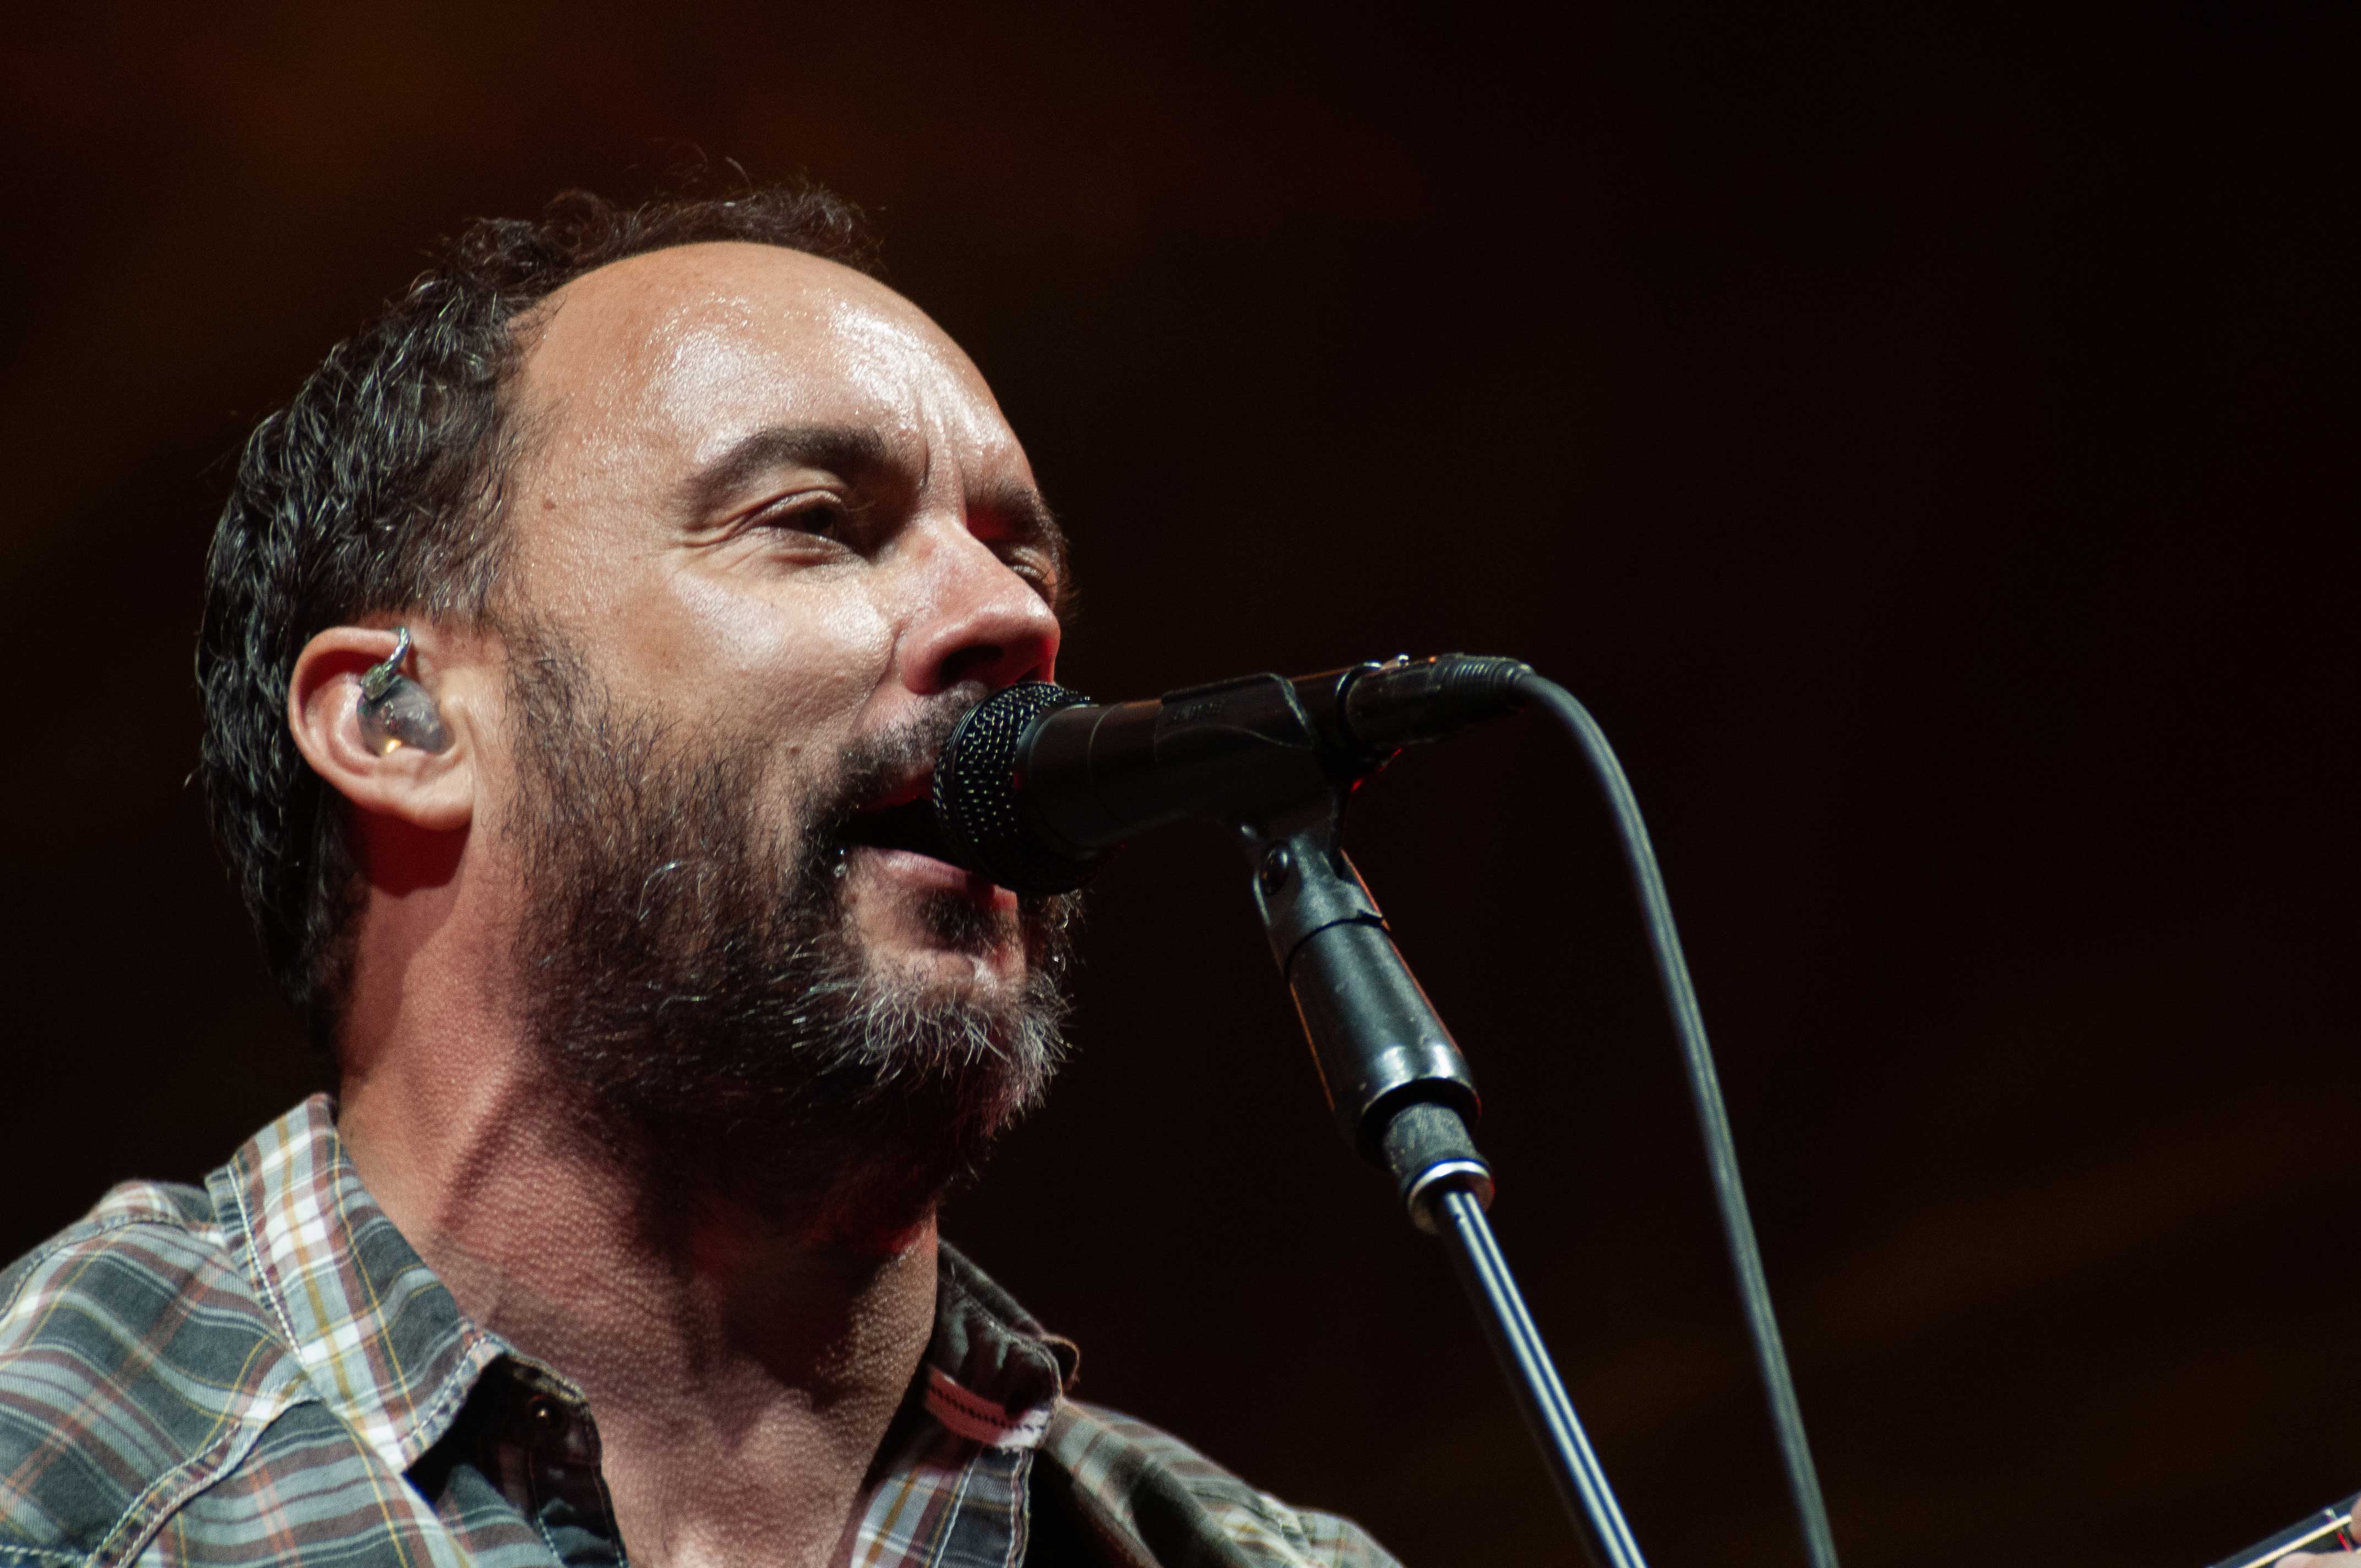 PHOTO: Dave Matthews singing. Photo by The Signal Assistant Editor Miles Shellshear.